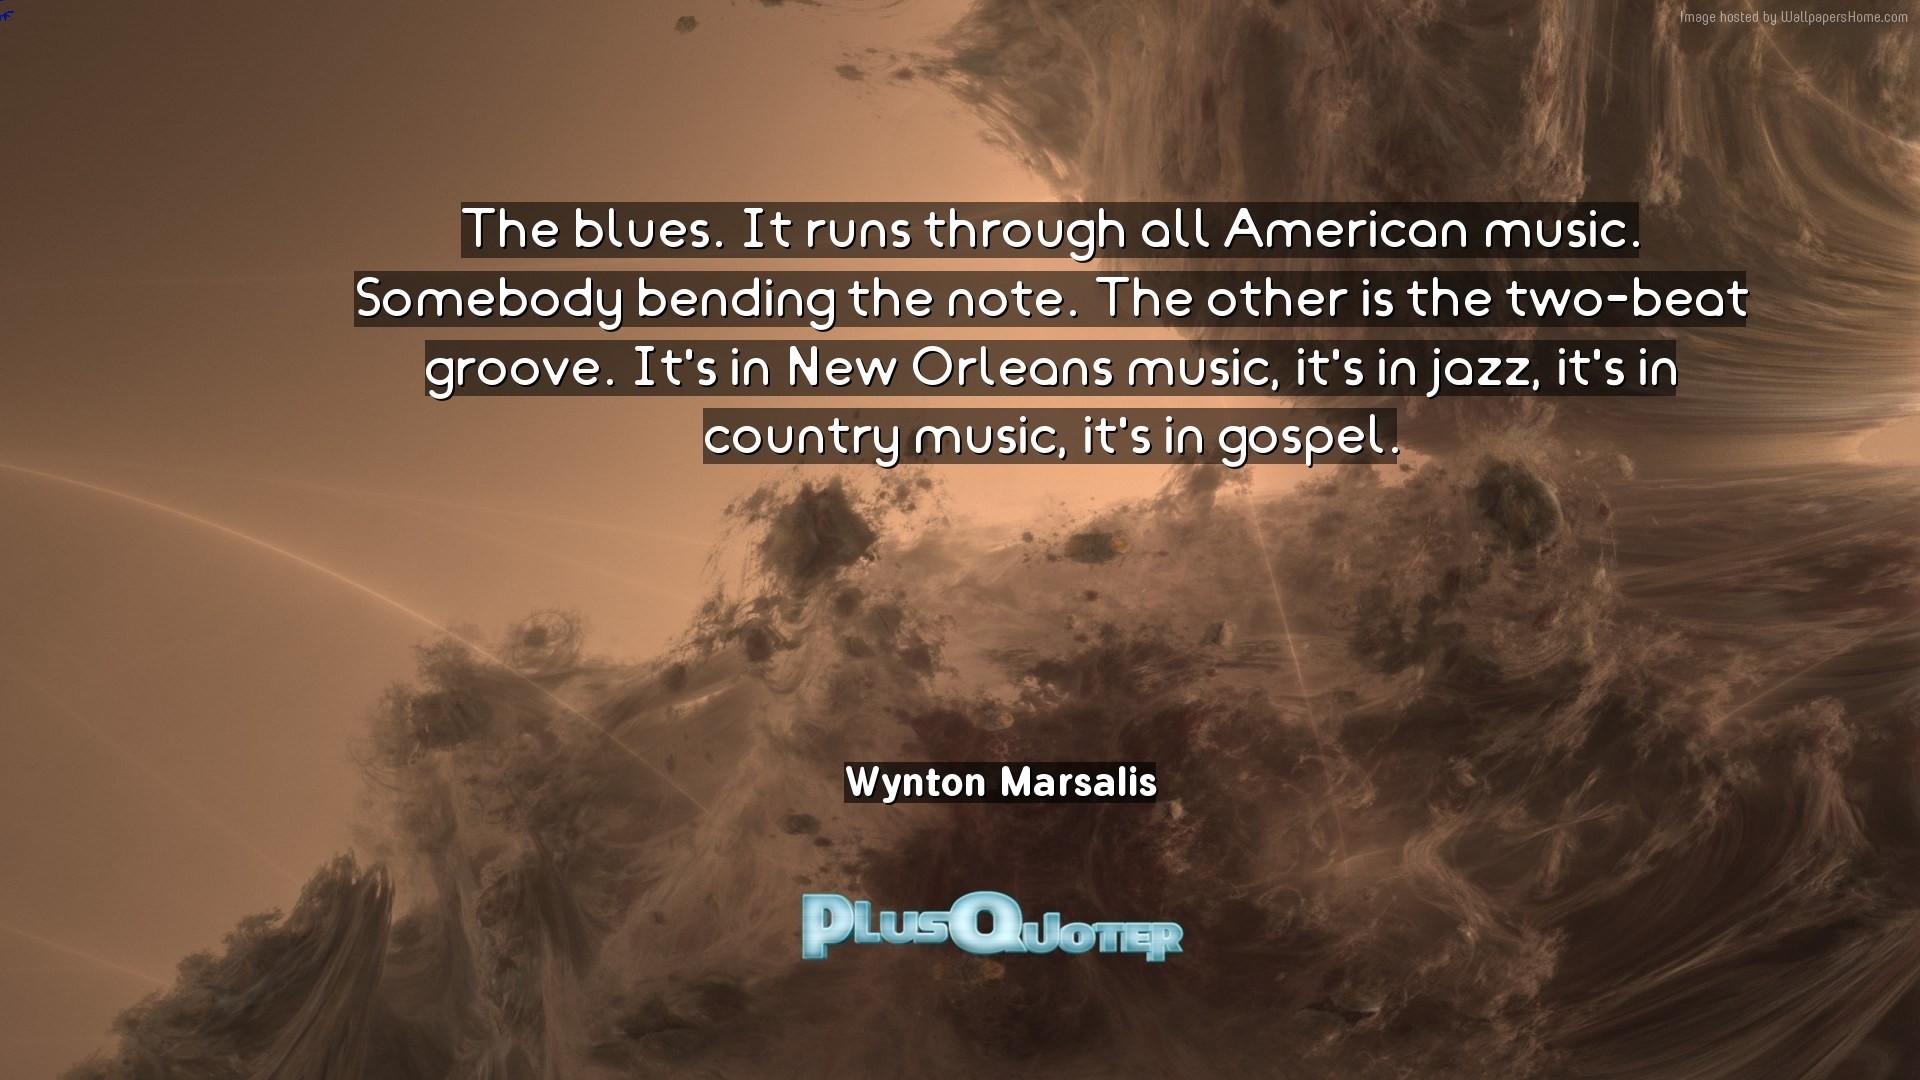 1920x1080 Download Wallpaper with inspirational Quotes- "The blues. It runs through  all American music